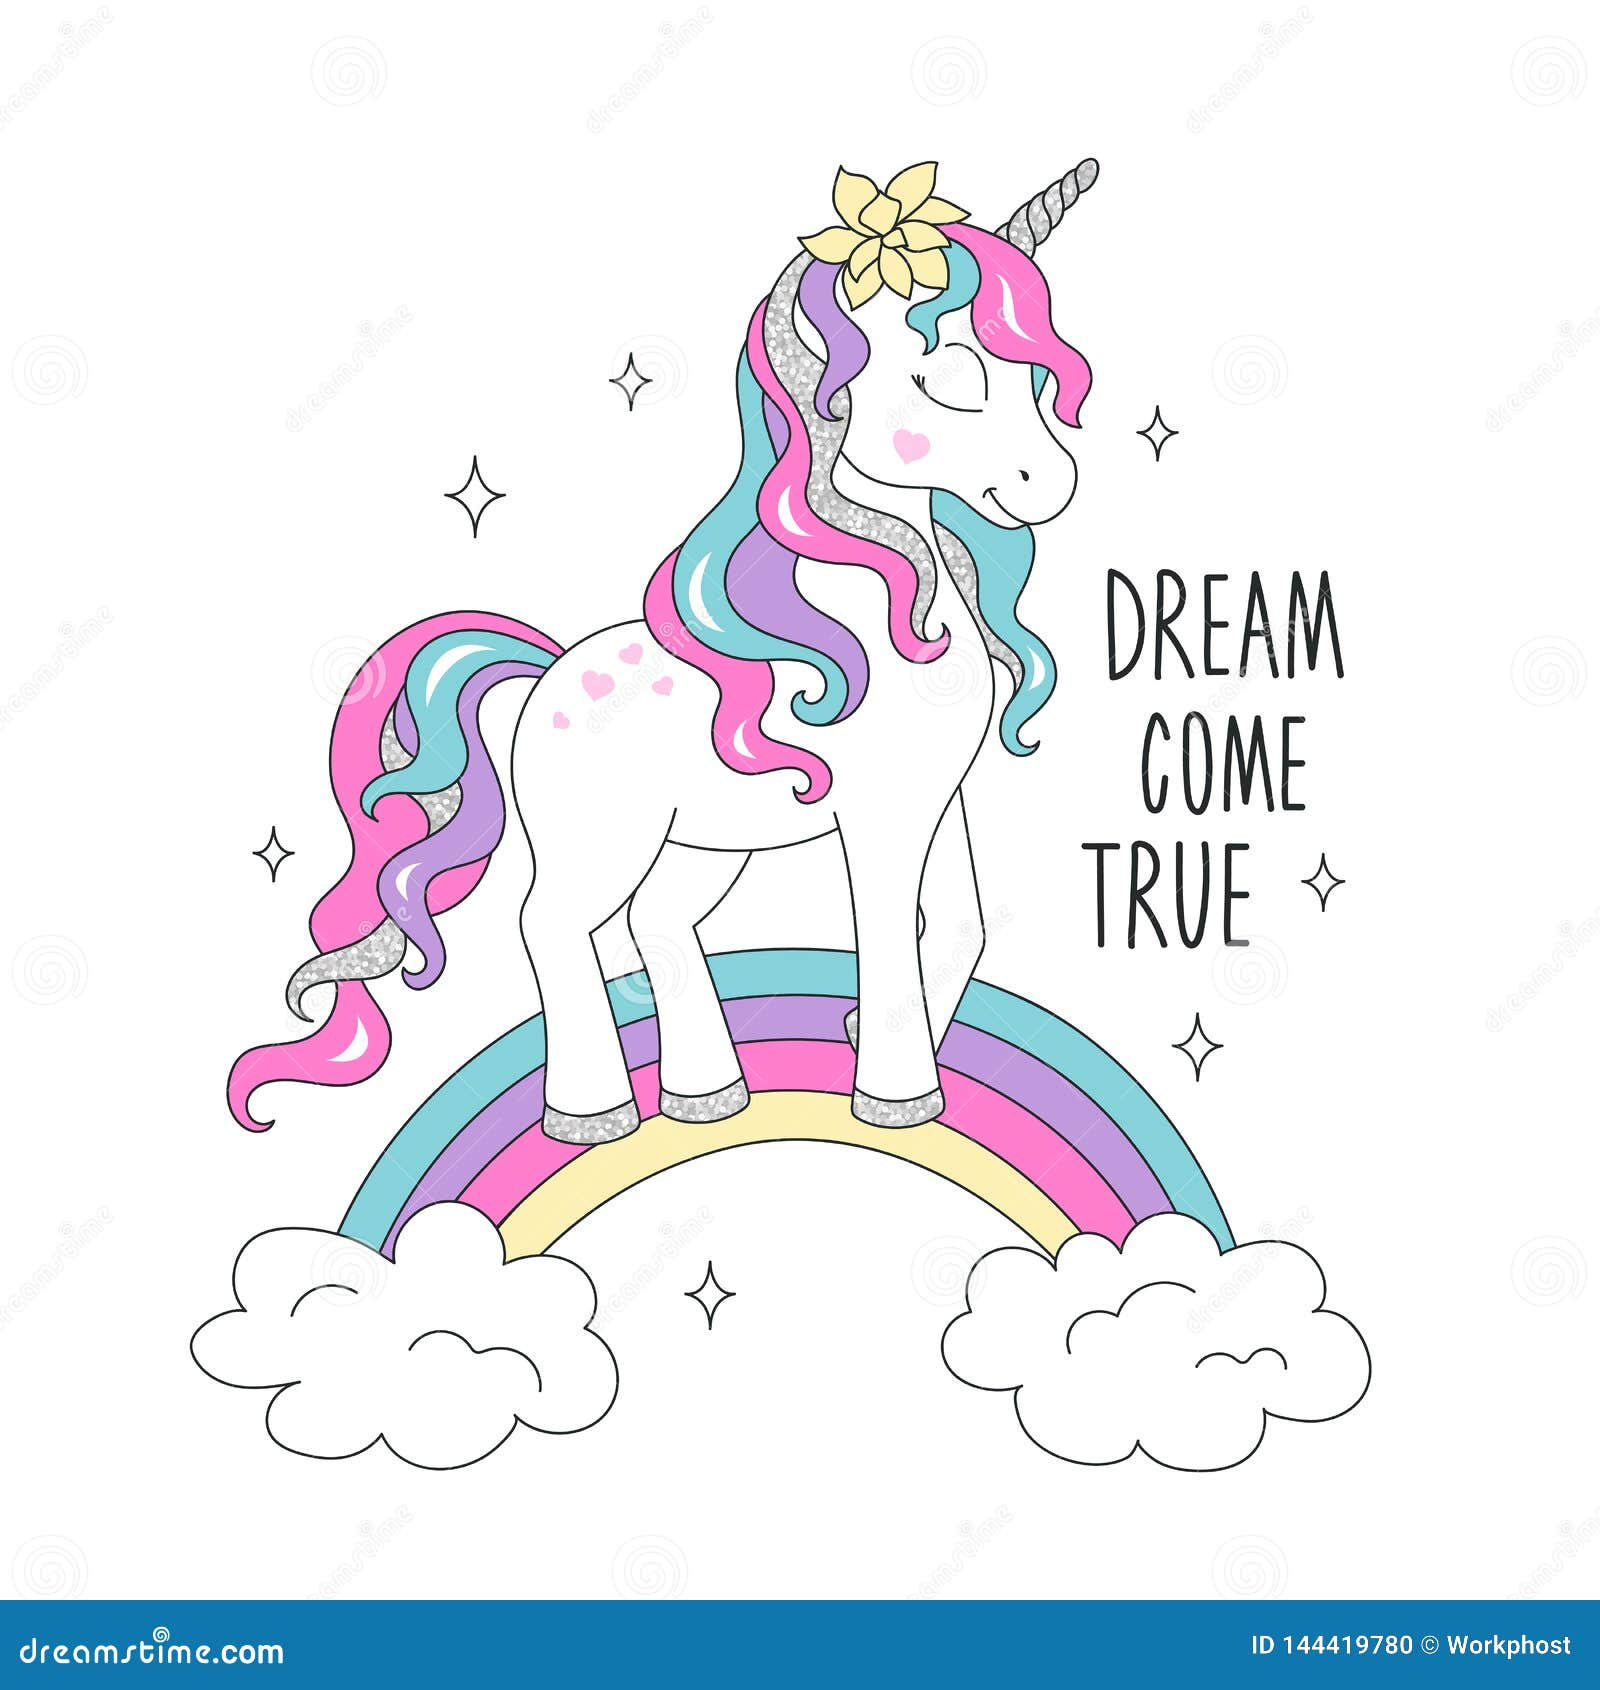 Glitter Unicorn On A Rainbow For T Shirts Dream Come True Text Design For Kids Fashion Illustration Drawing In Modern Style For Stock Illustration Illustration Of Modern Cartoon